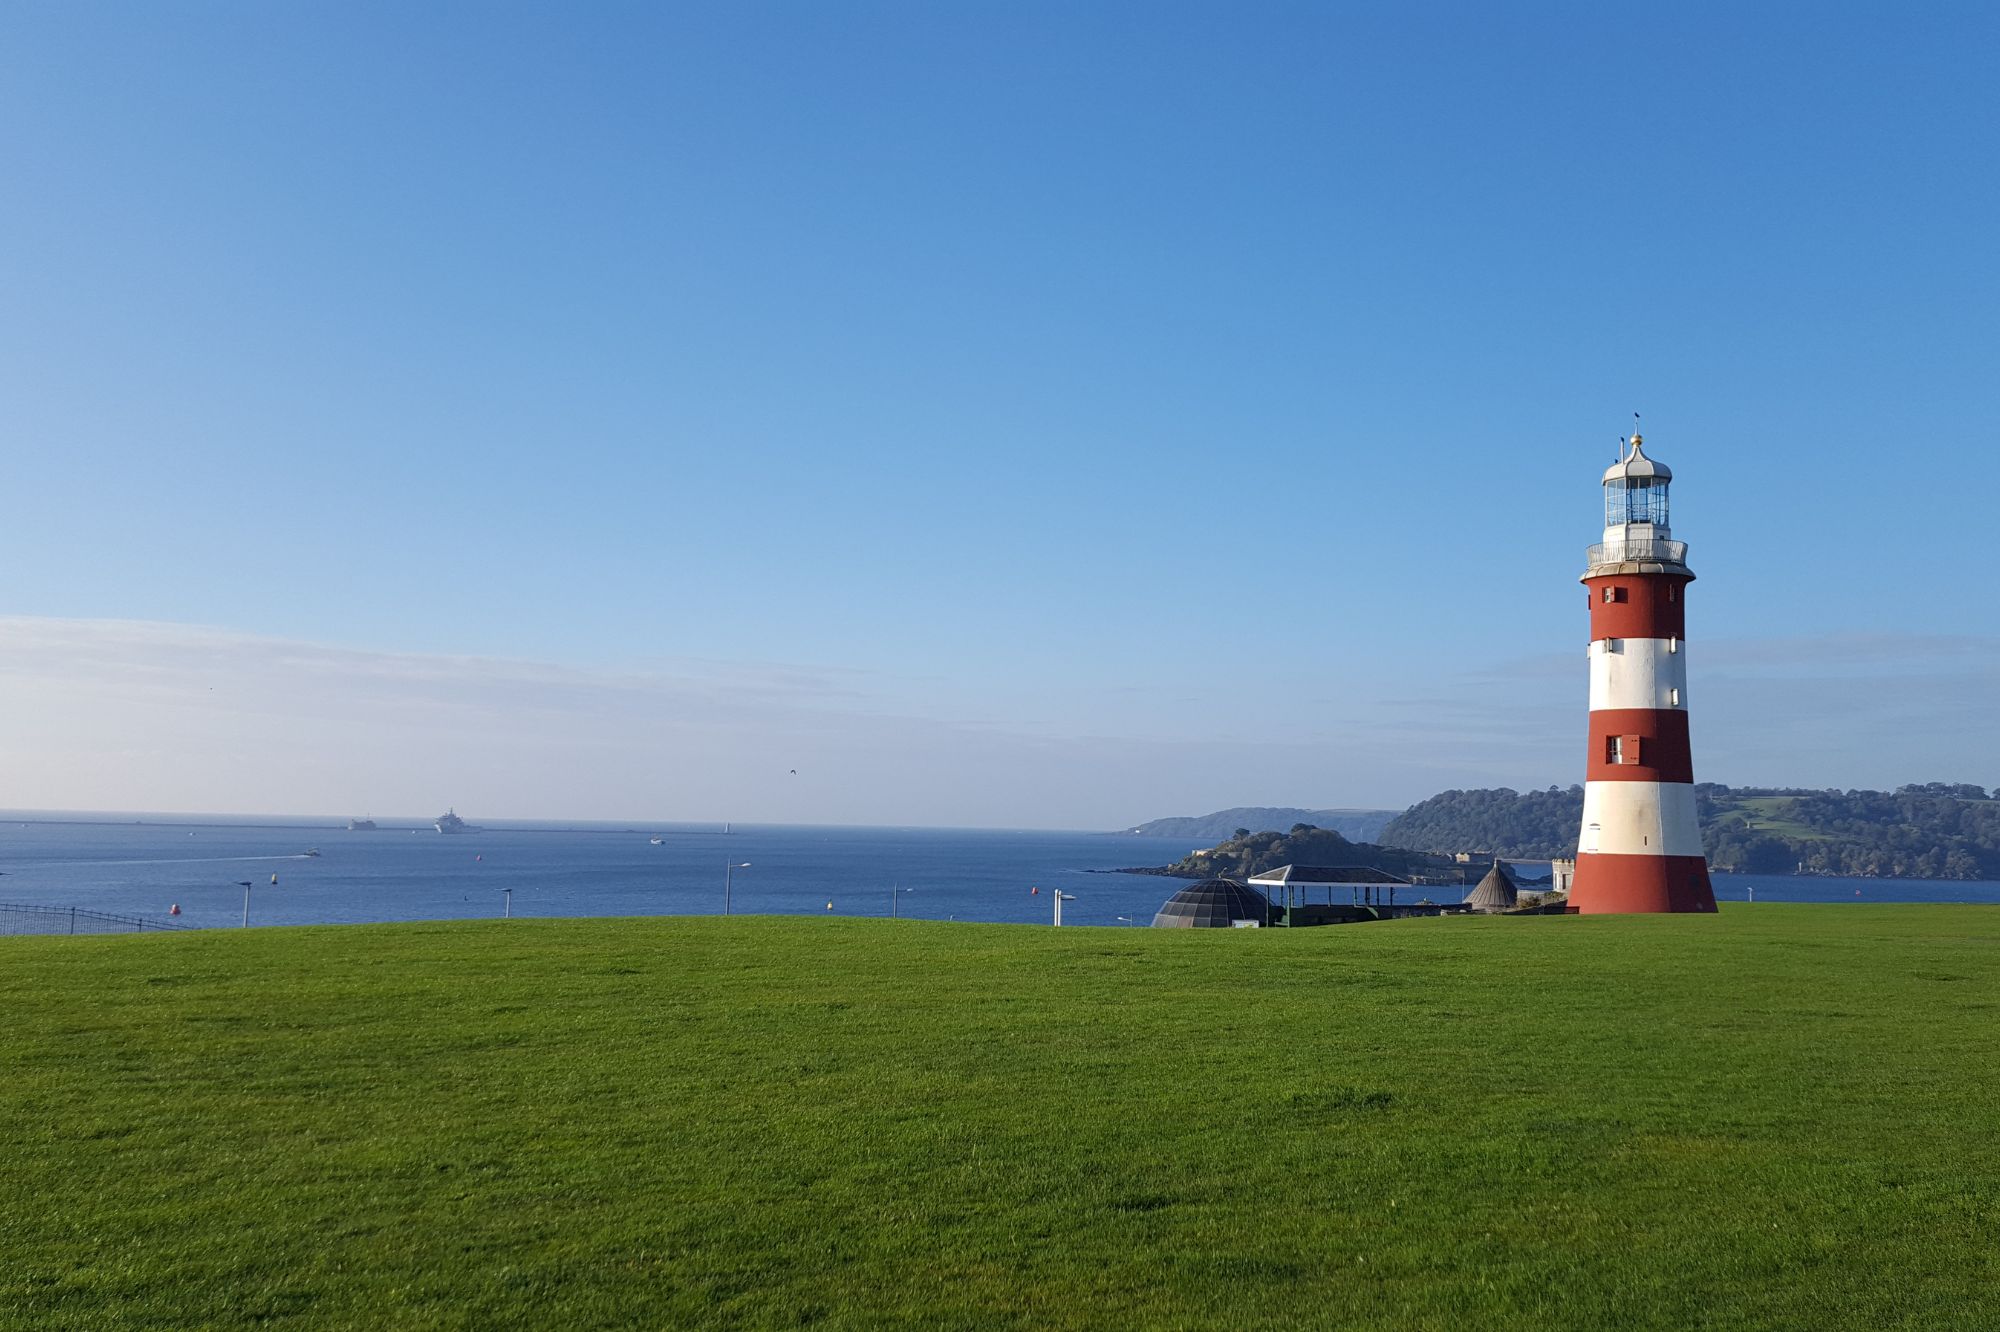 Plymouth Hoe and lighthouse - just a minute's walk from Plymouth Marine Laboratory